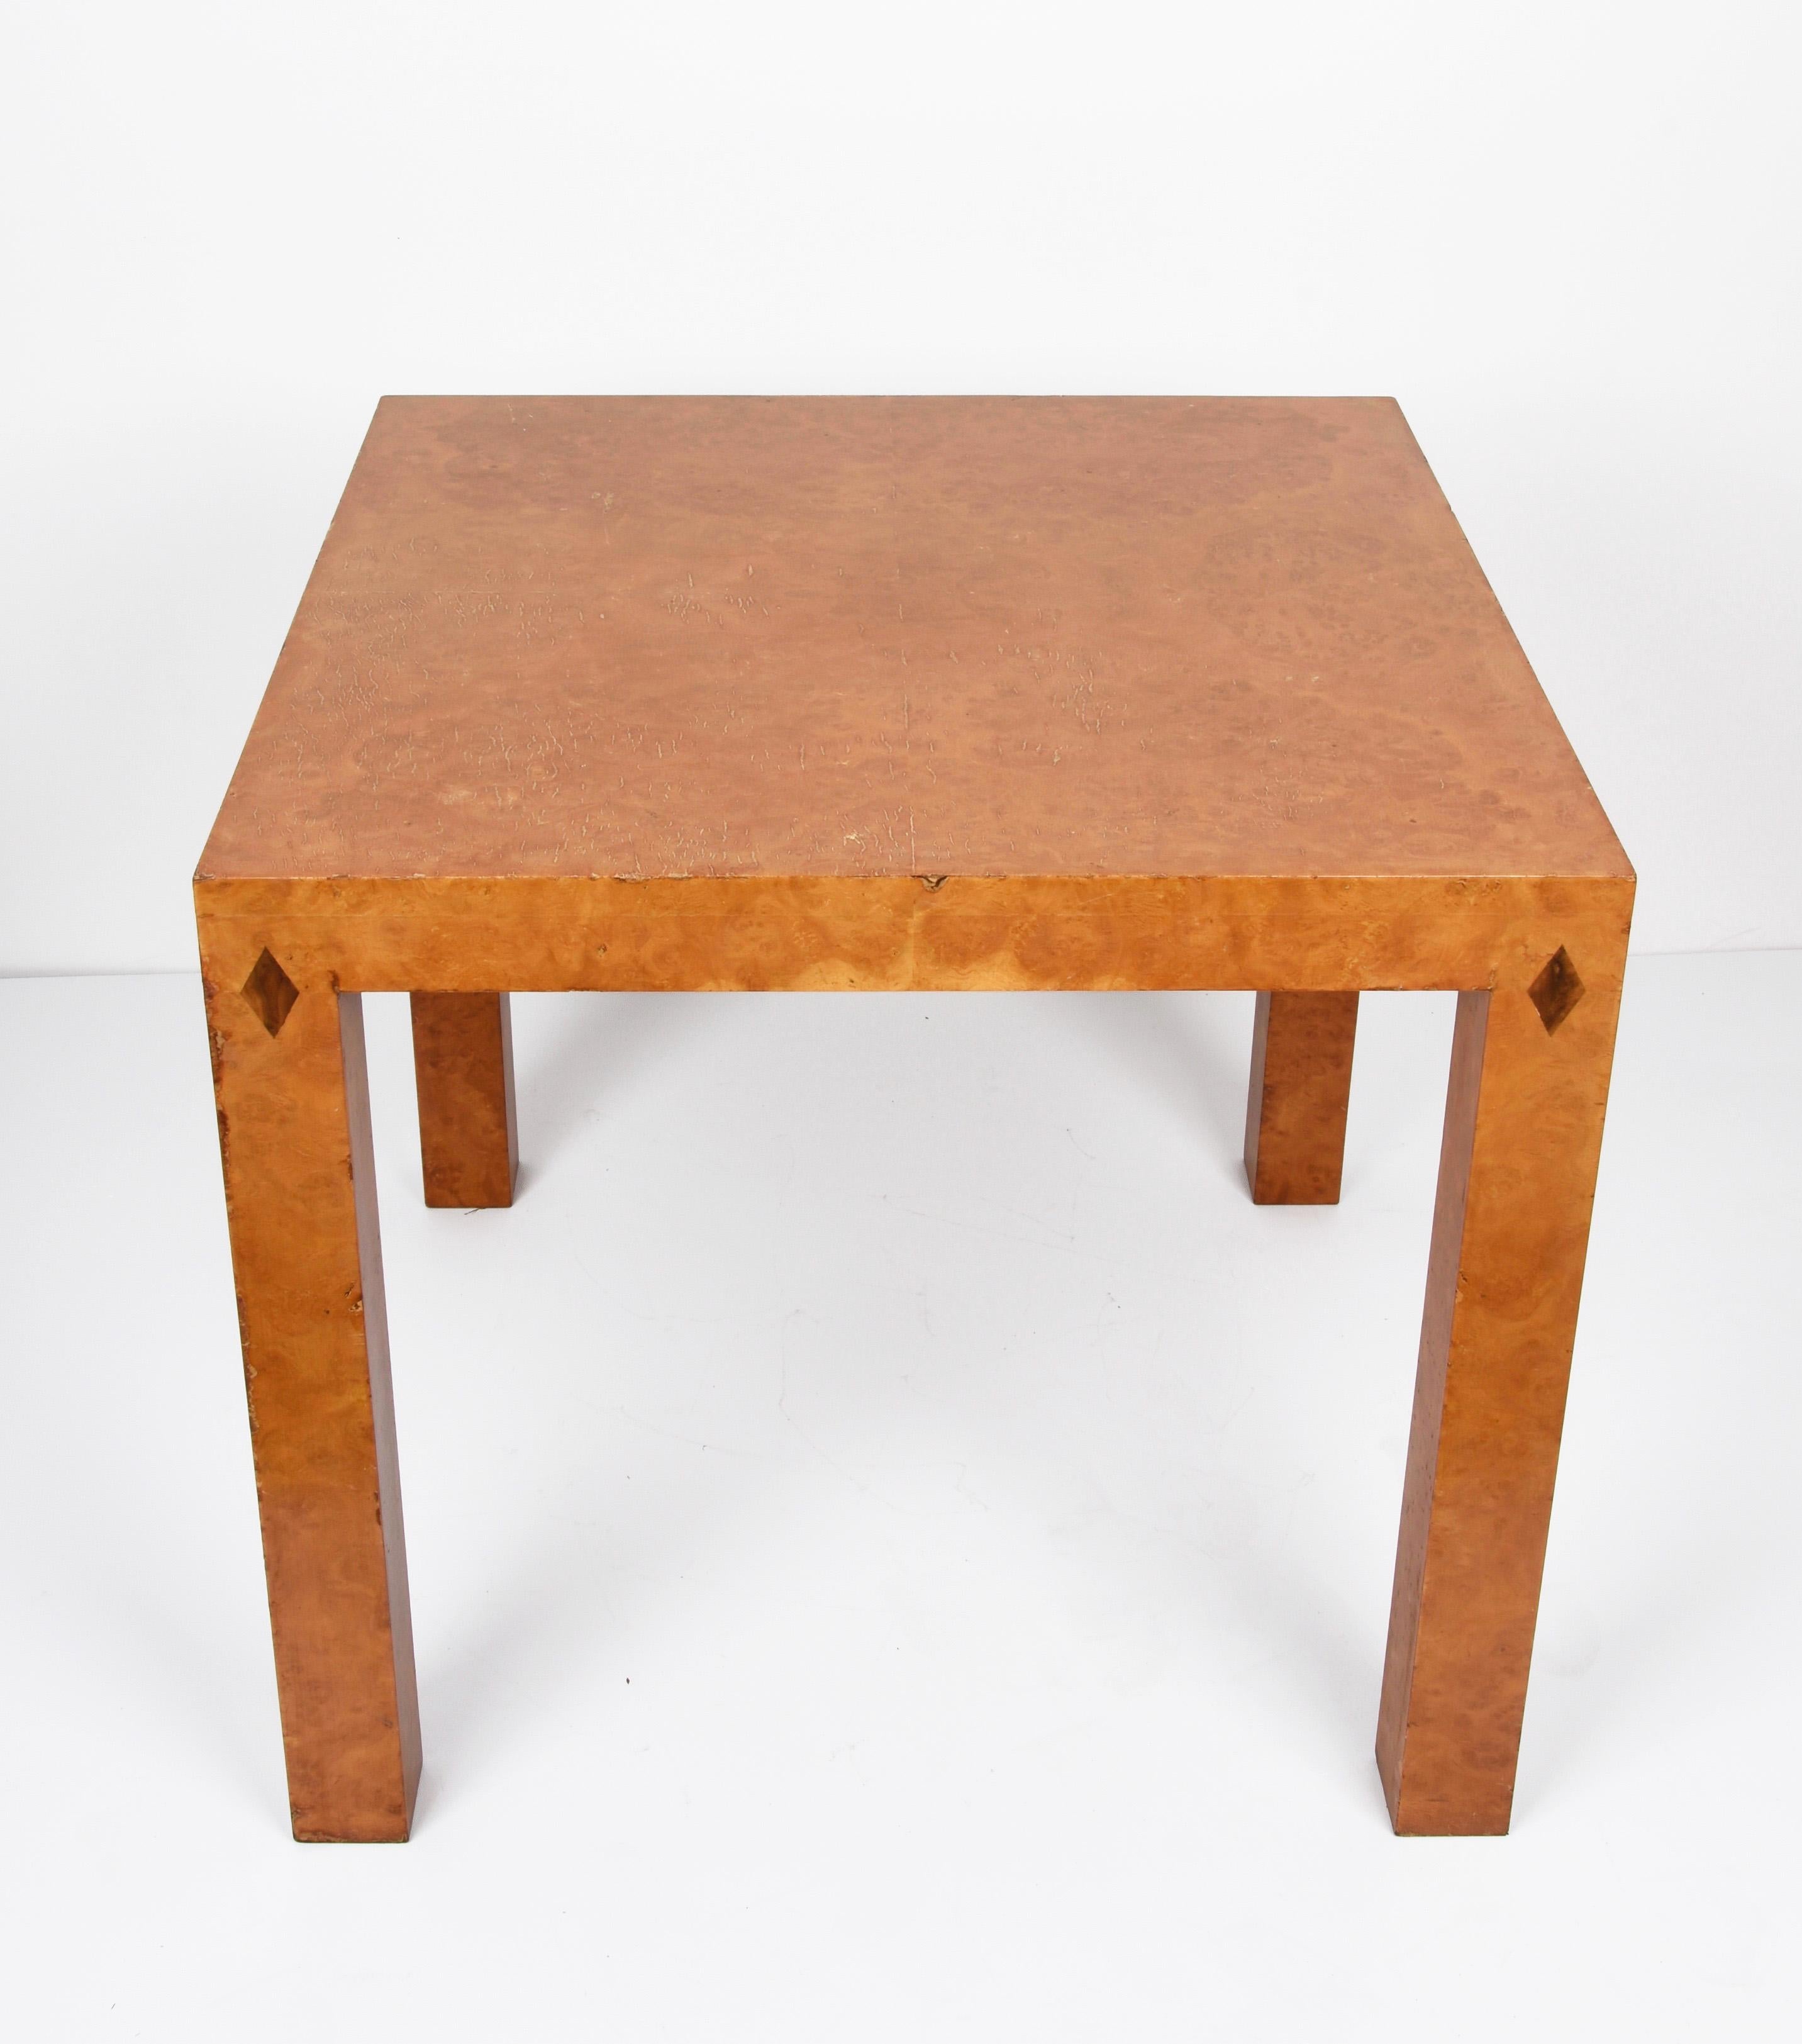 Mid-Century Modern Midcentury Square Poplar Briar Italian Game or Coffee Table with Inlays, 1970s